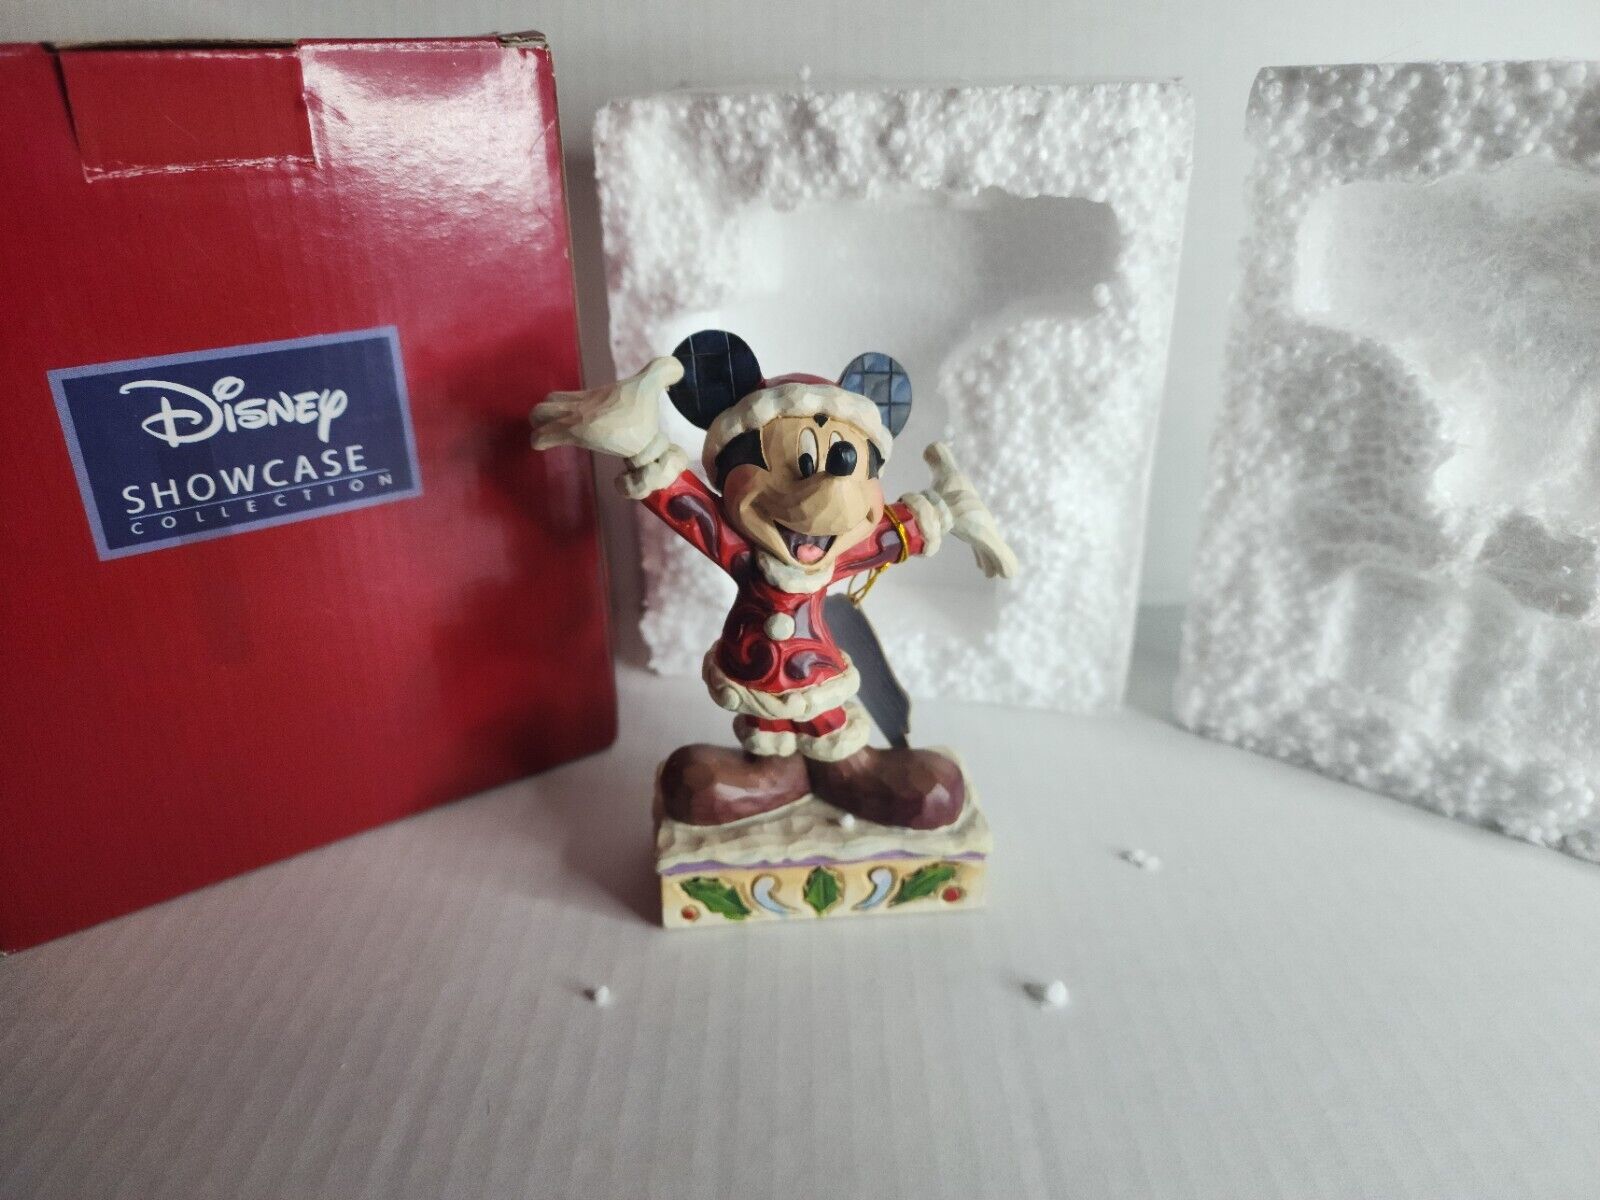 Disney Traditions Holiday Gift Mickey Mouse Figurine 2017 Wood Carved Christmas